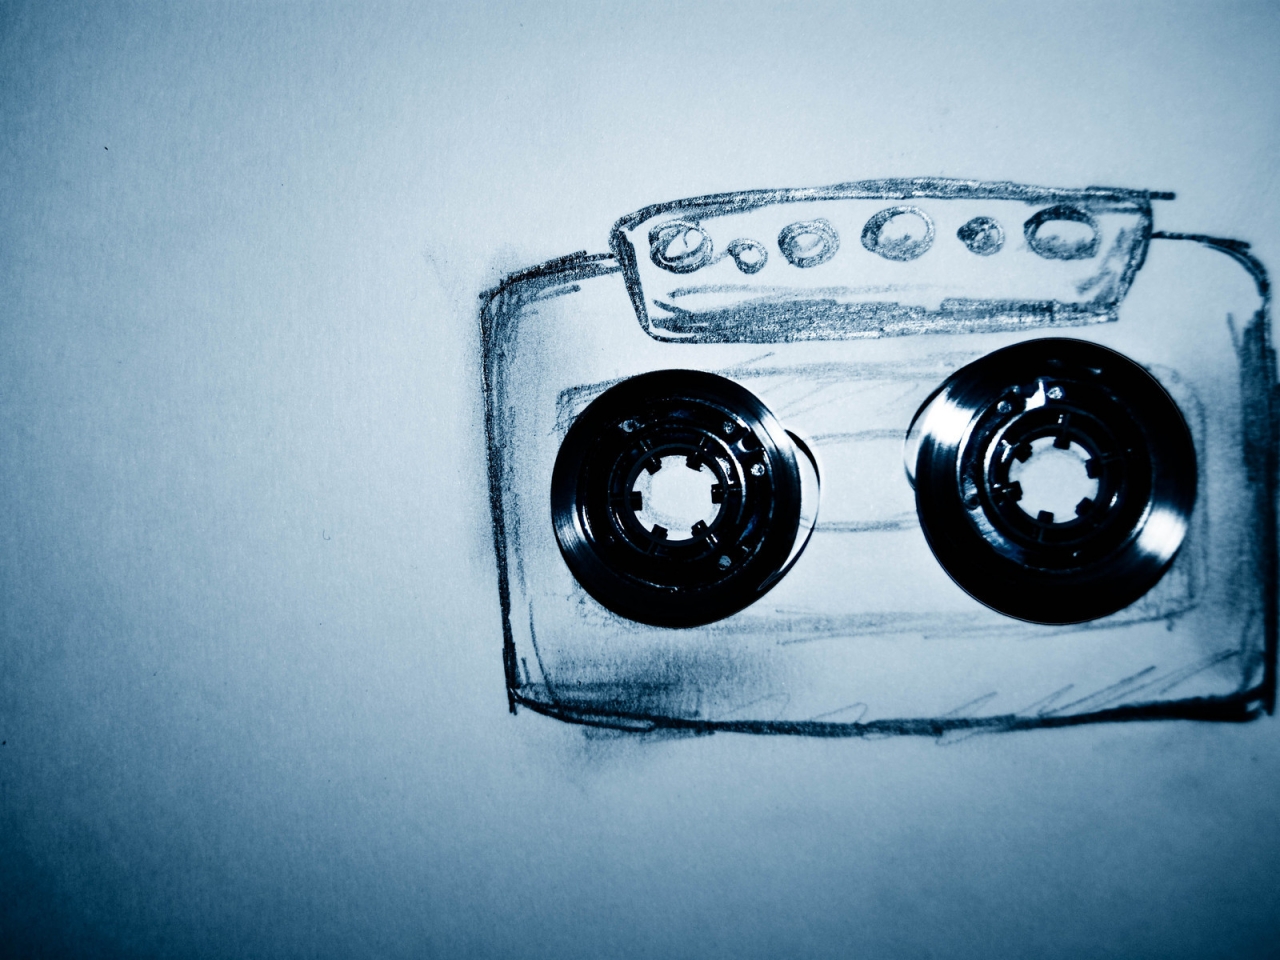 Cassette Drawings for 1280 x 960 resolution